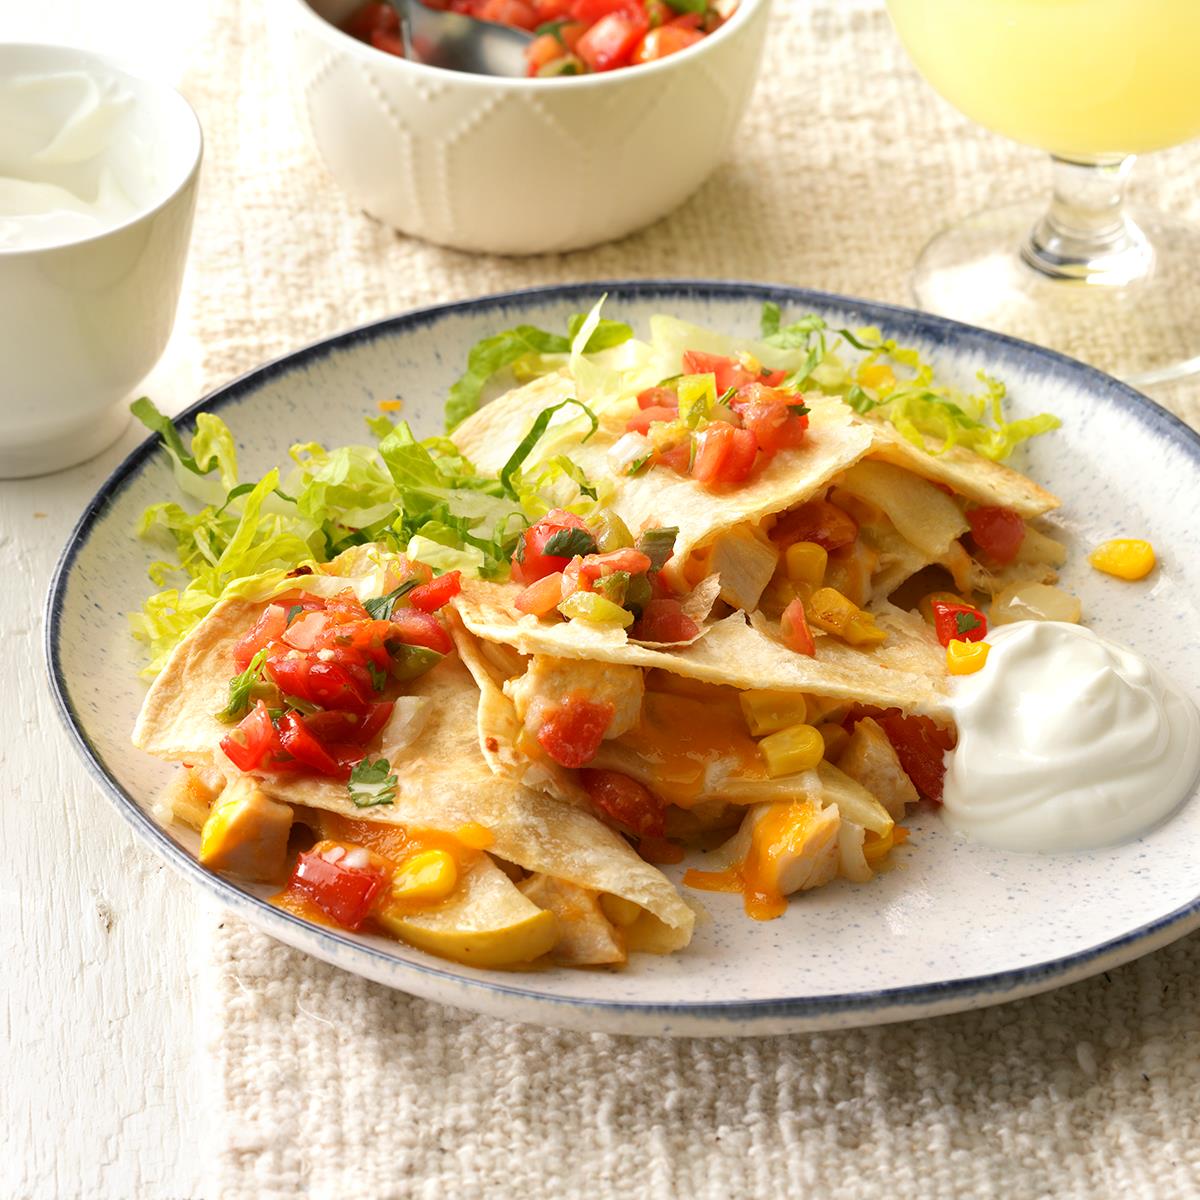 My sister came up with an easy recipe that can be served as a main course or an appetizer. People are surprised by the combination of chicken, apples, tomatoes and corn inside the crispy tortillas, but they love it.            —Stacia Slagle of Maysville, Missouri <a href="https://www.tasteofhome.com/recipes/apple-chicken-quesadillas/">Get Recipe</a>